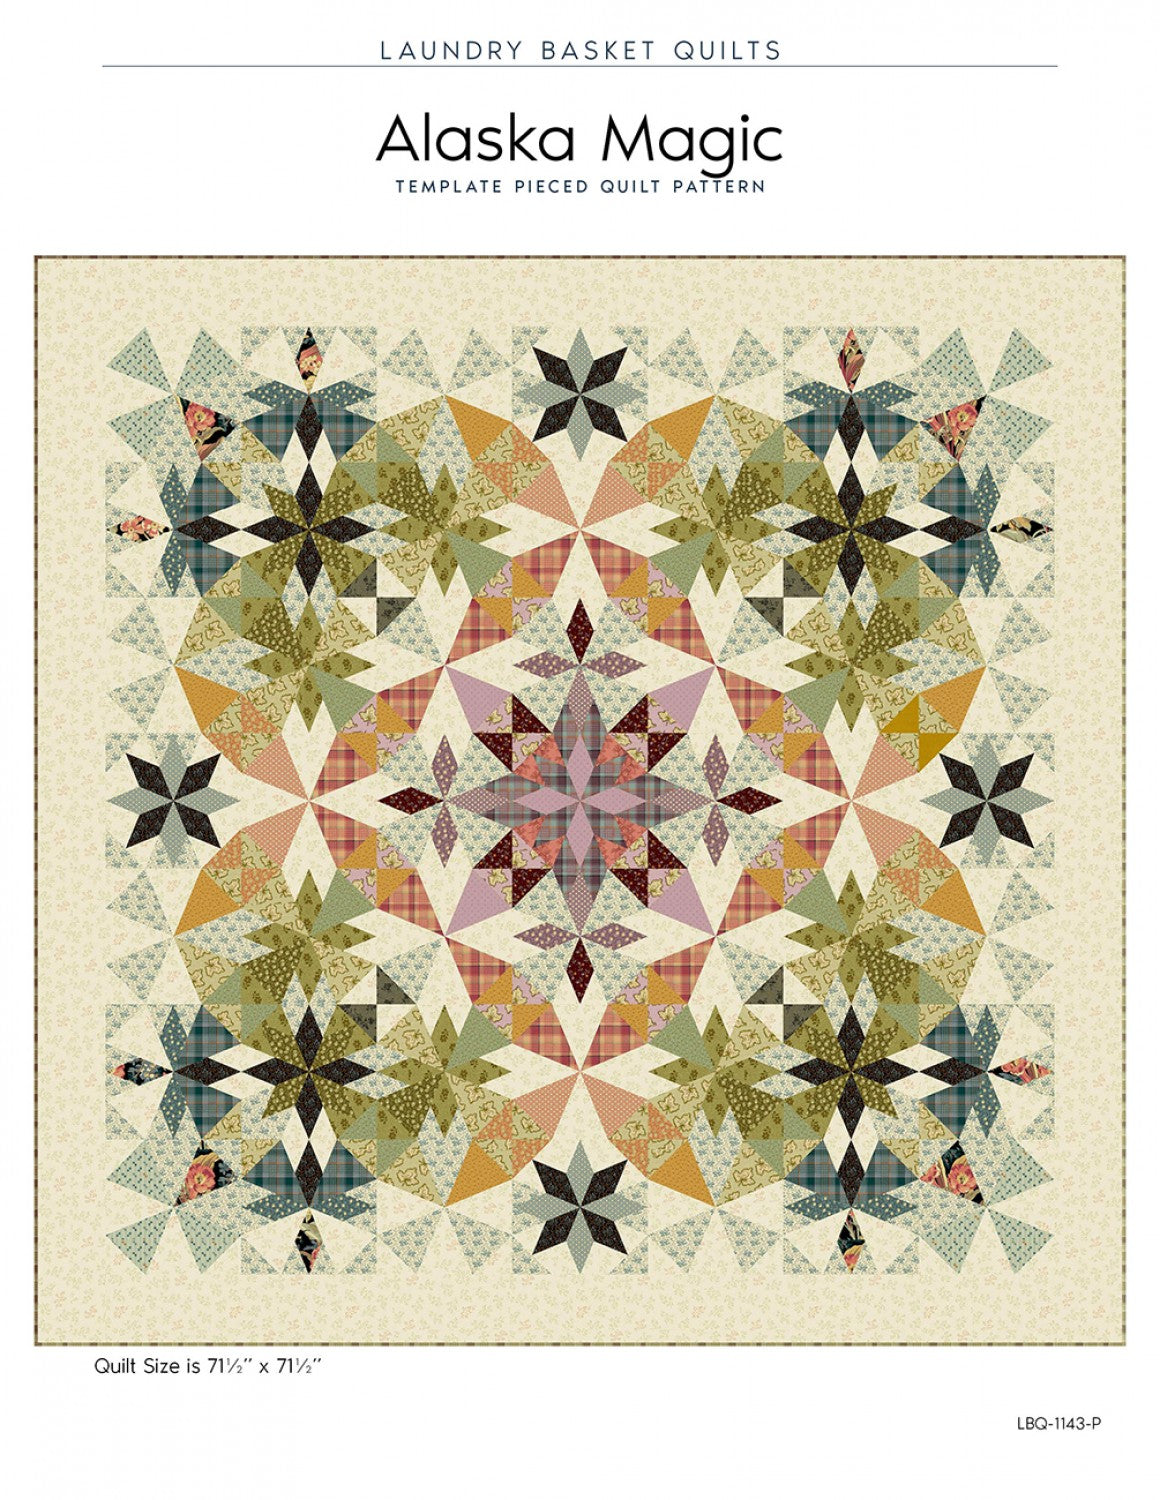 Alaska Magic Quilt Pattern by Edyta Sitar of Laundry Basket Quilts